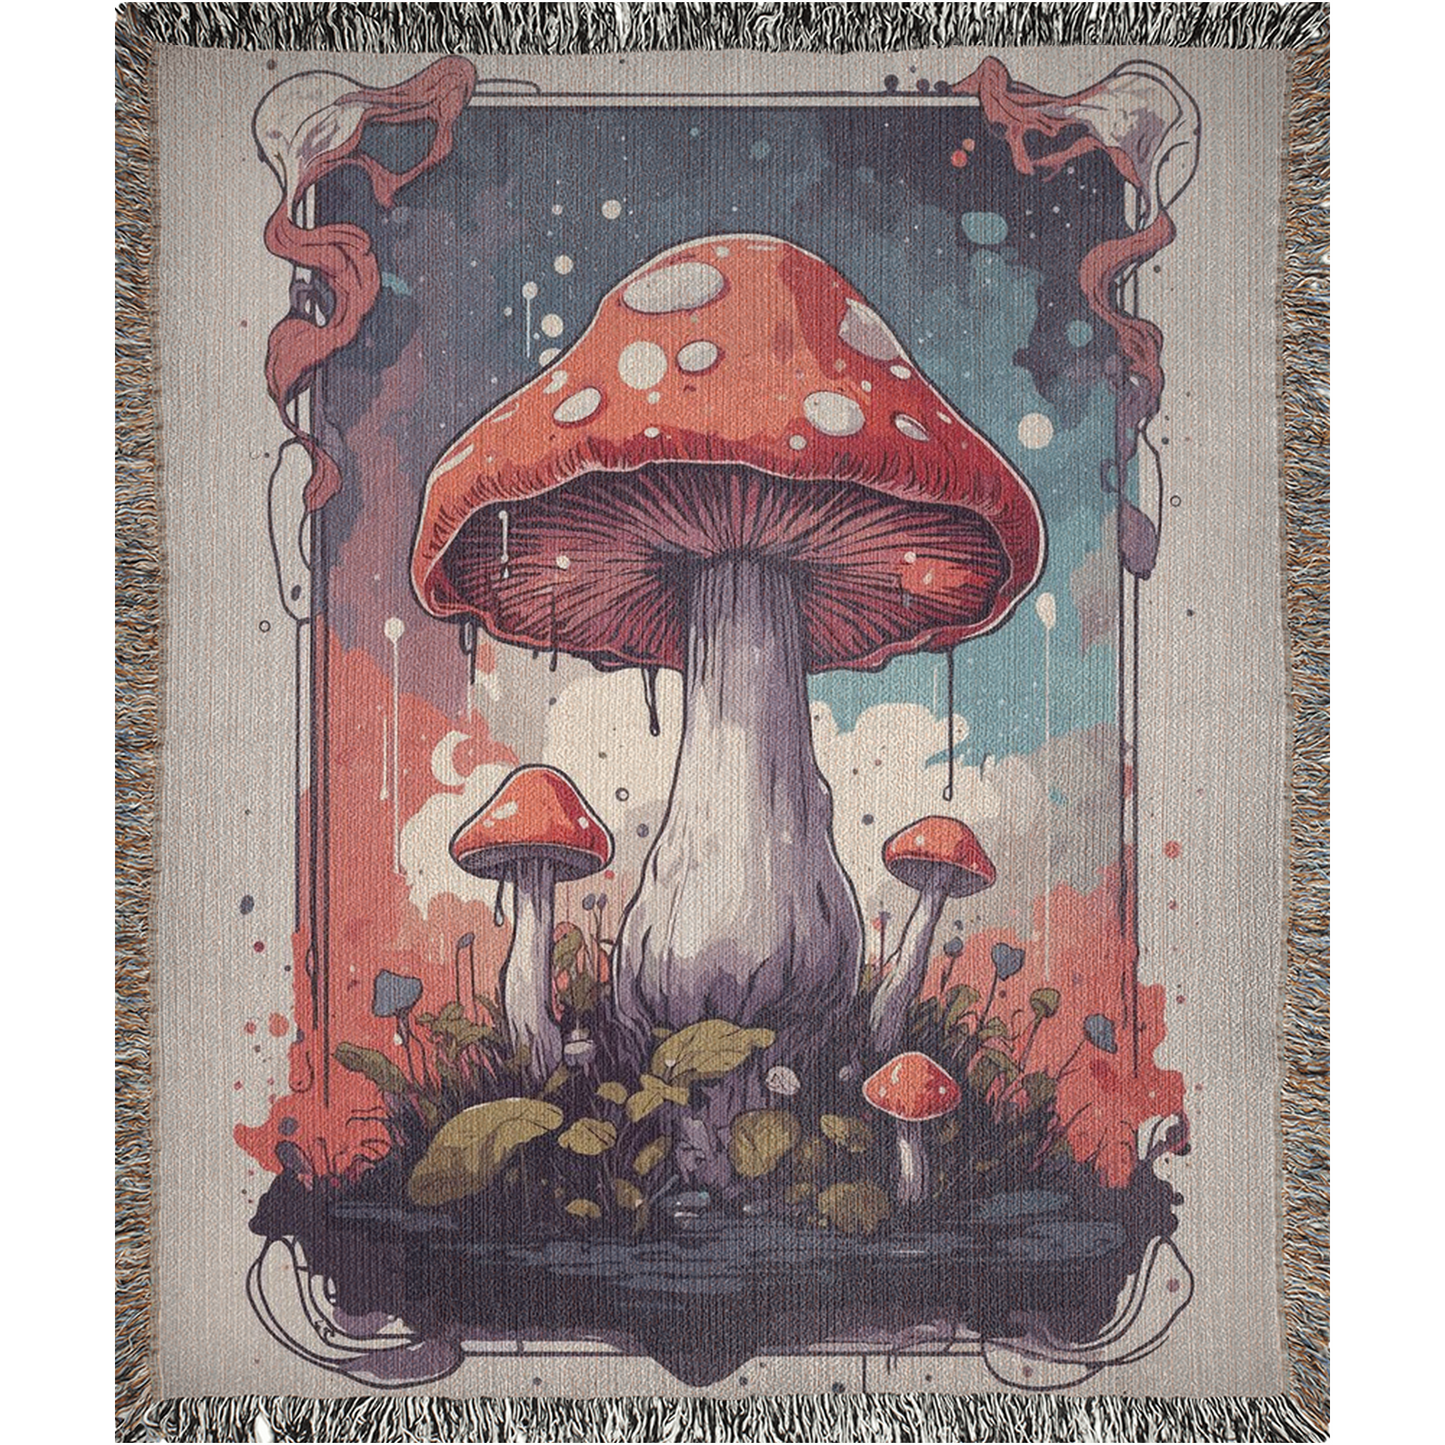 Fungal Fantasy Cotton Woven Blankets